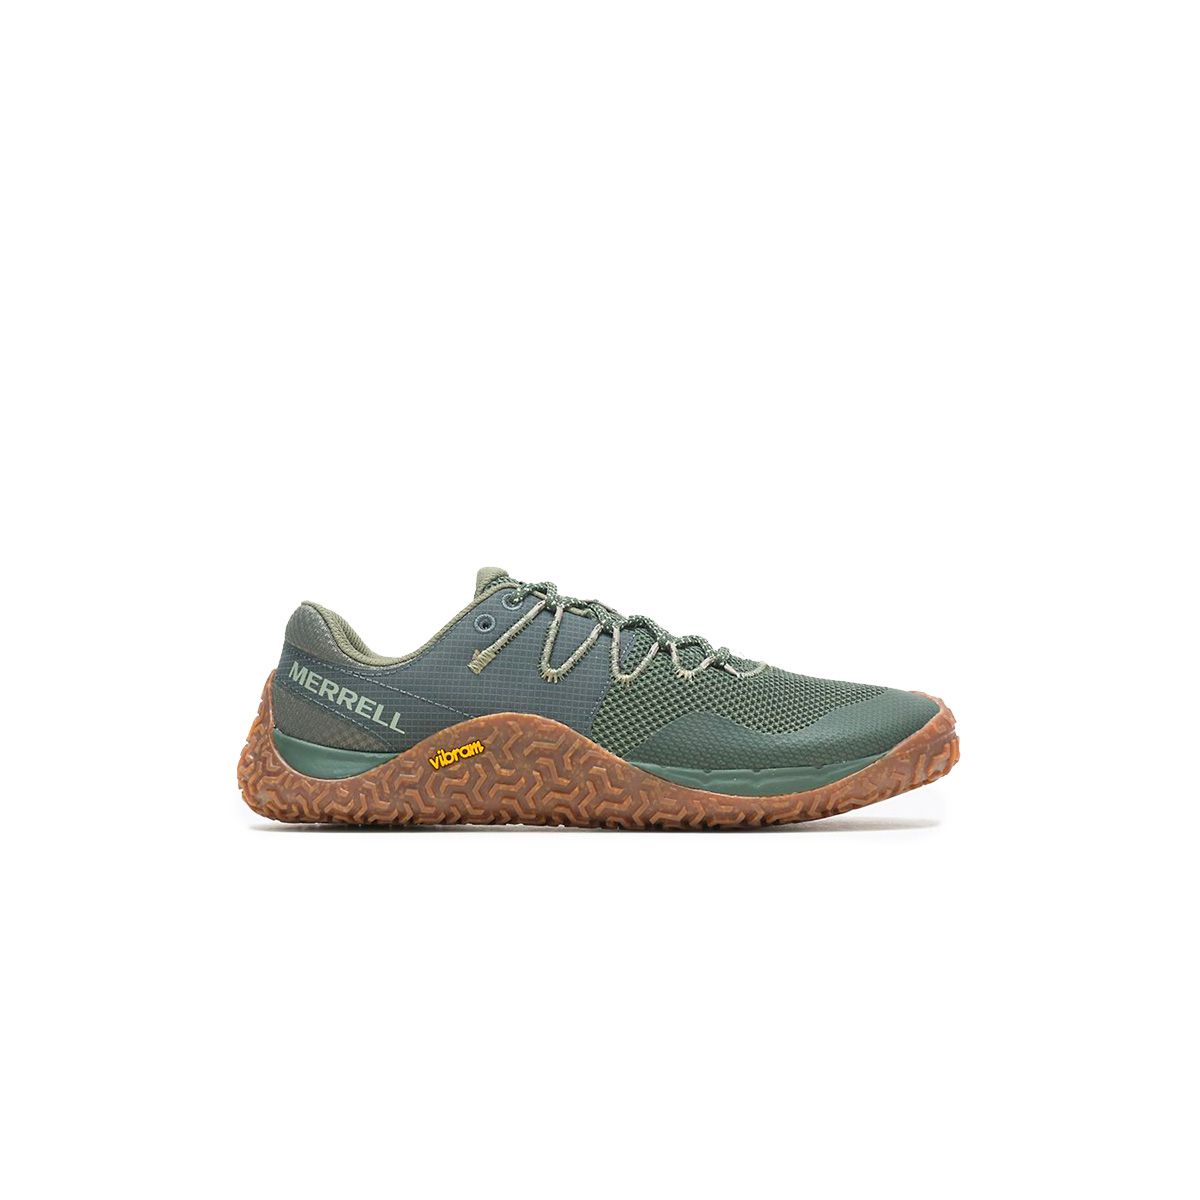 Merrell Trail 7 | Minimalist shoe for everything